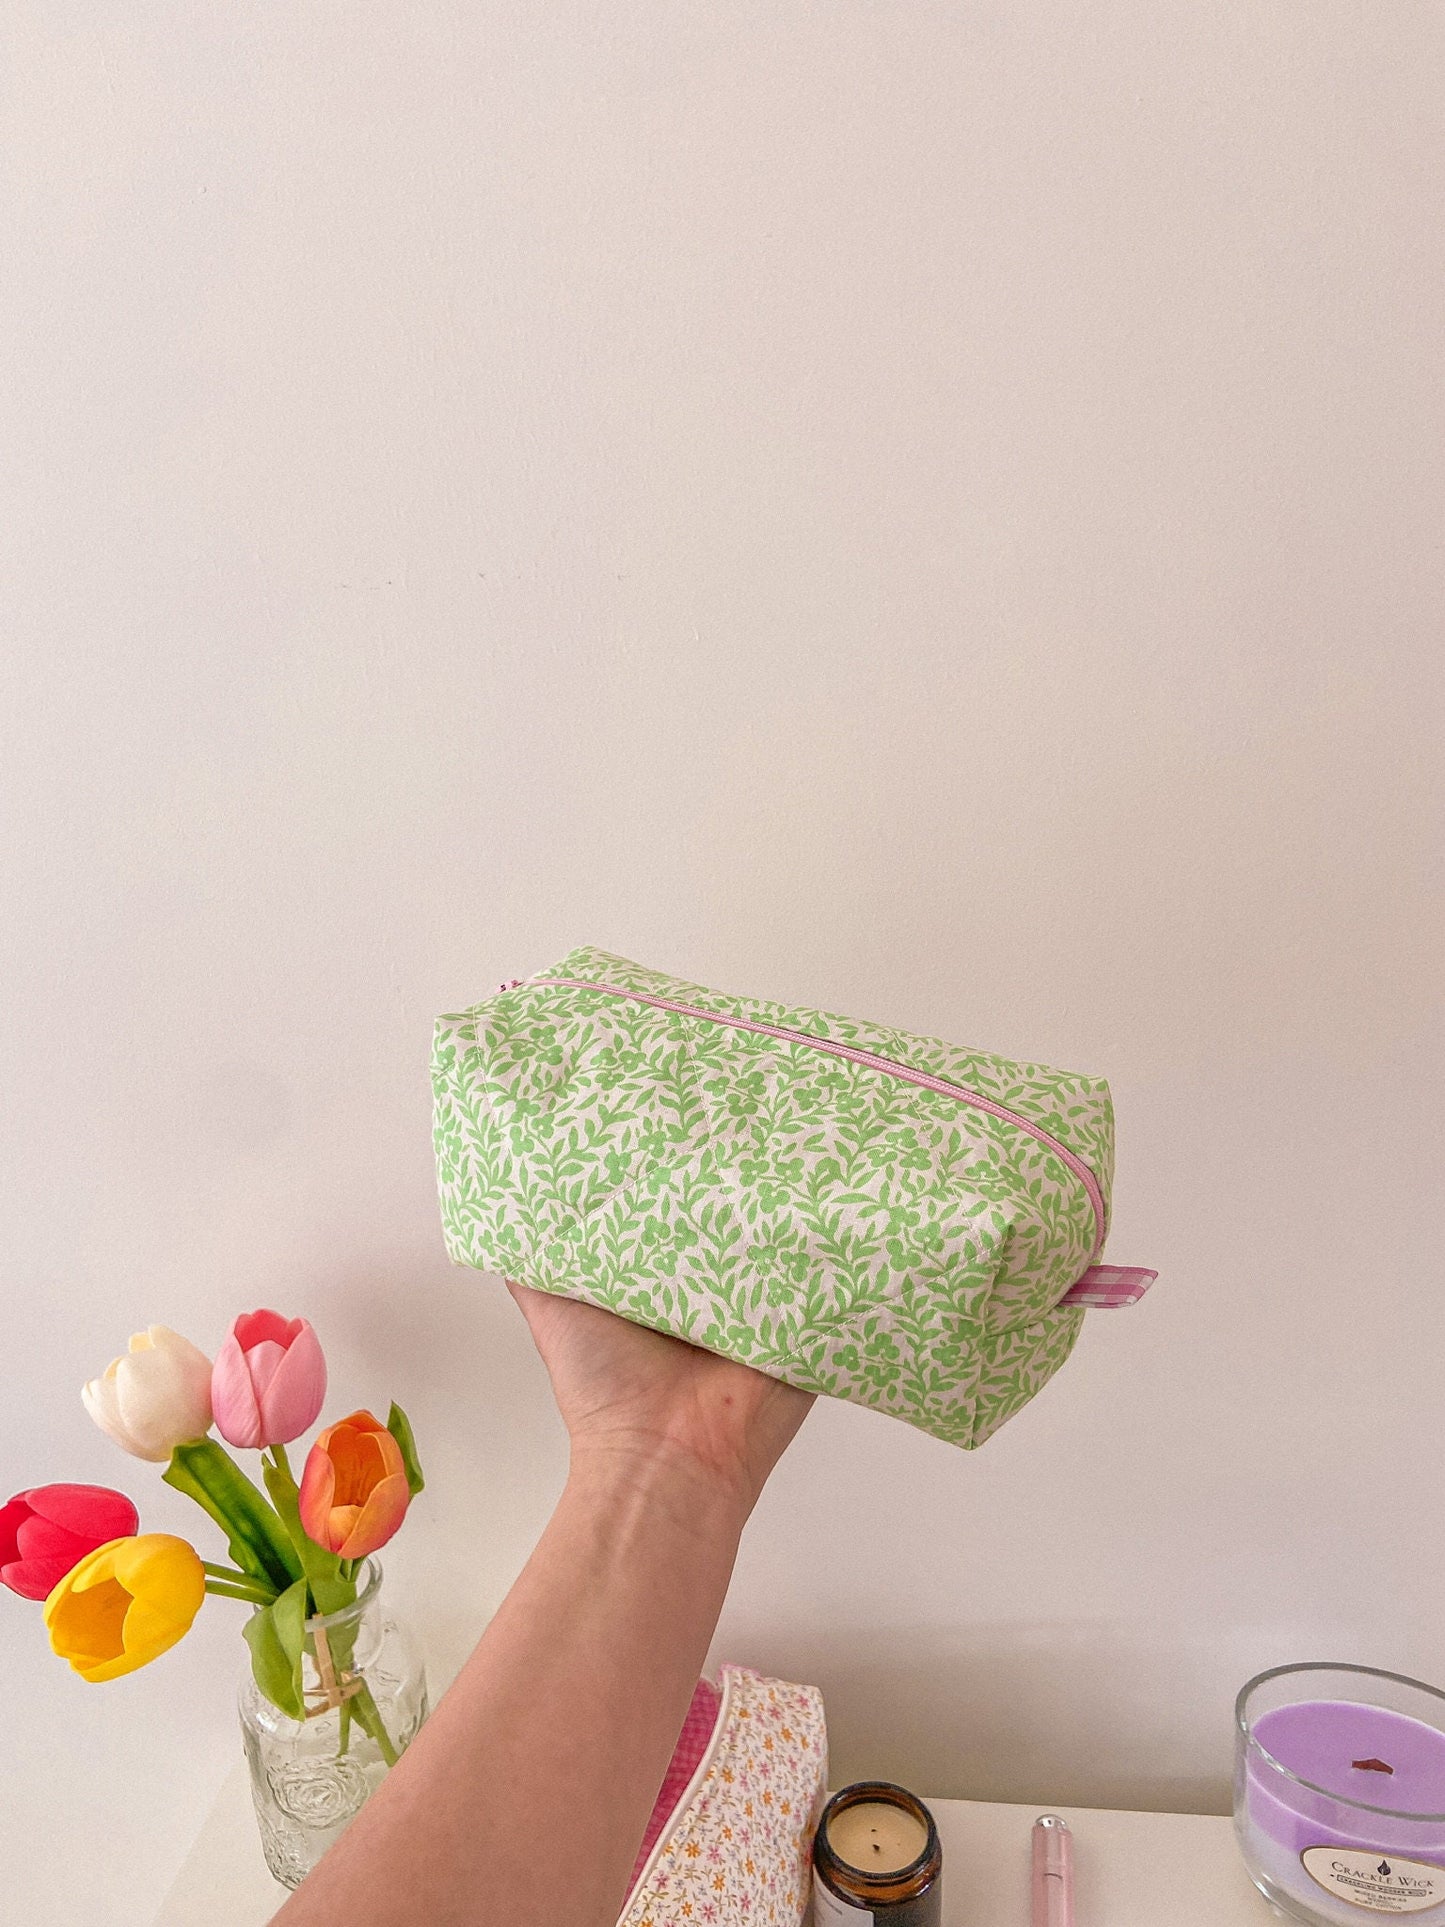 FLORAL MAKEUP BAG medium green floral quilted cosmetic bag lined with pink gingham, cotton zip-up pouch, make-up brush bag handmade in U.K.